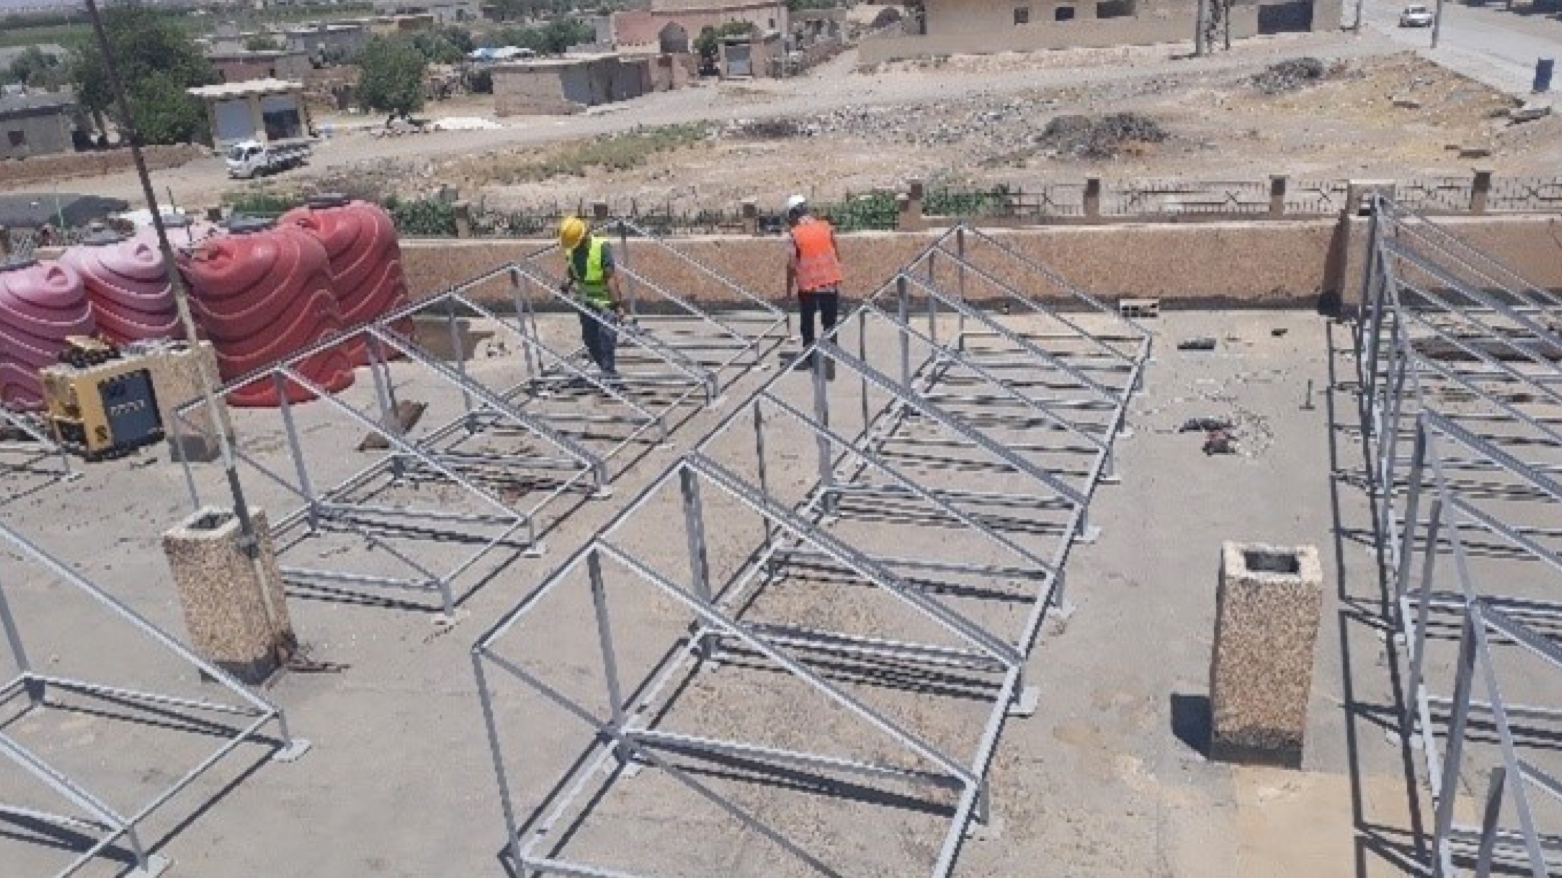 The Syria Recovery Trust Fund (SRTF) provides solar power and clean water to health centres in Raqqa and Deir-ez-Zor (Photo: SRTF)